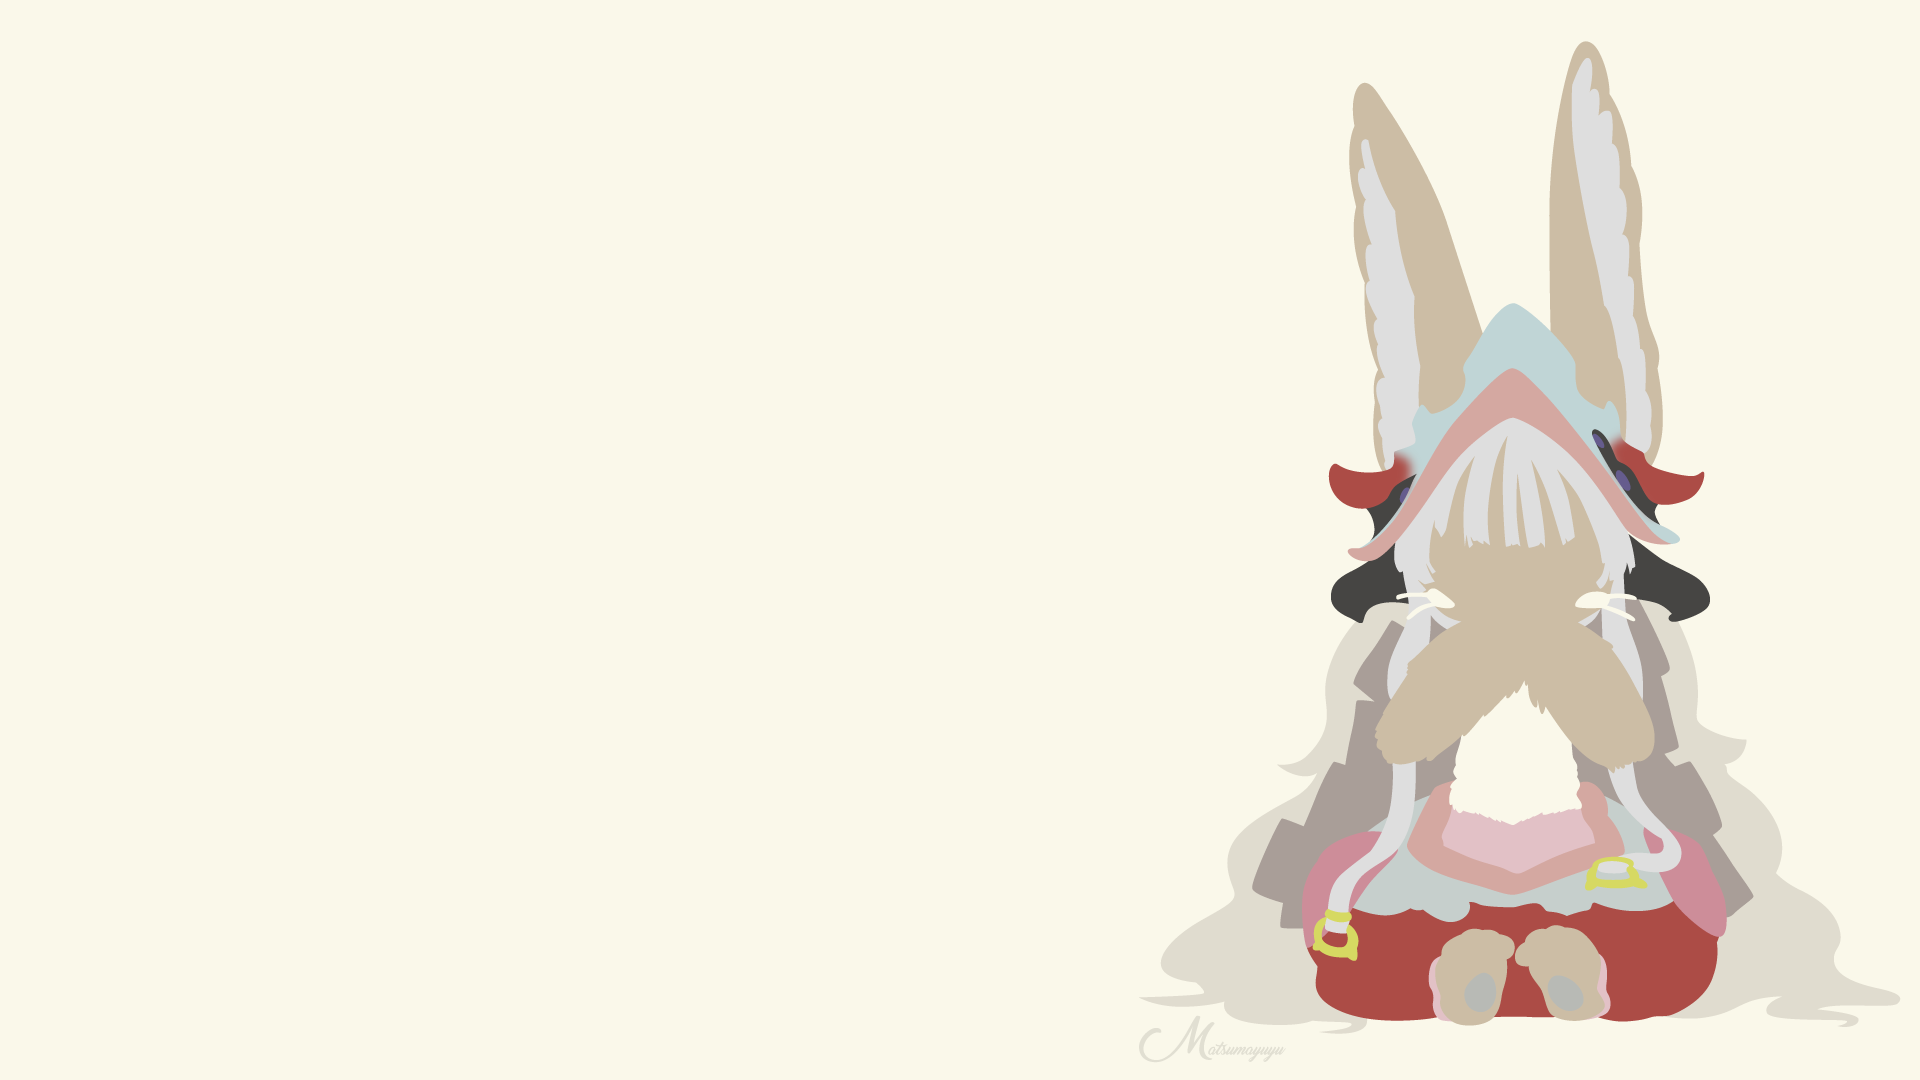 Nanachi made in abyss p k k hd wallpapers backgrounds free download rare gallery